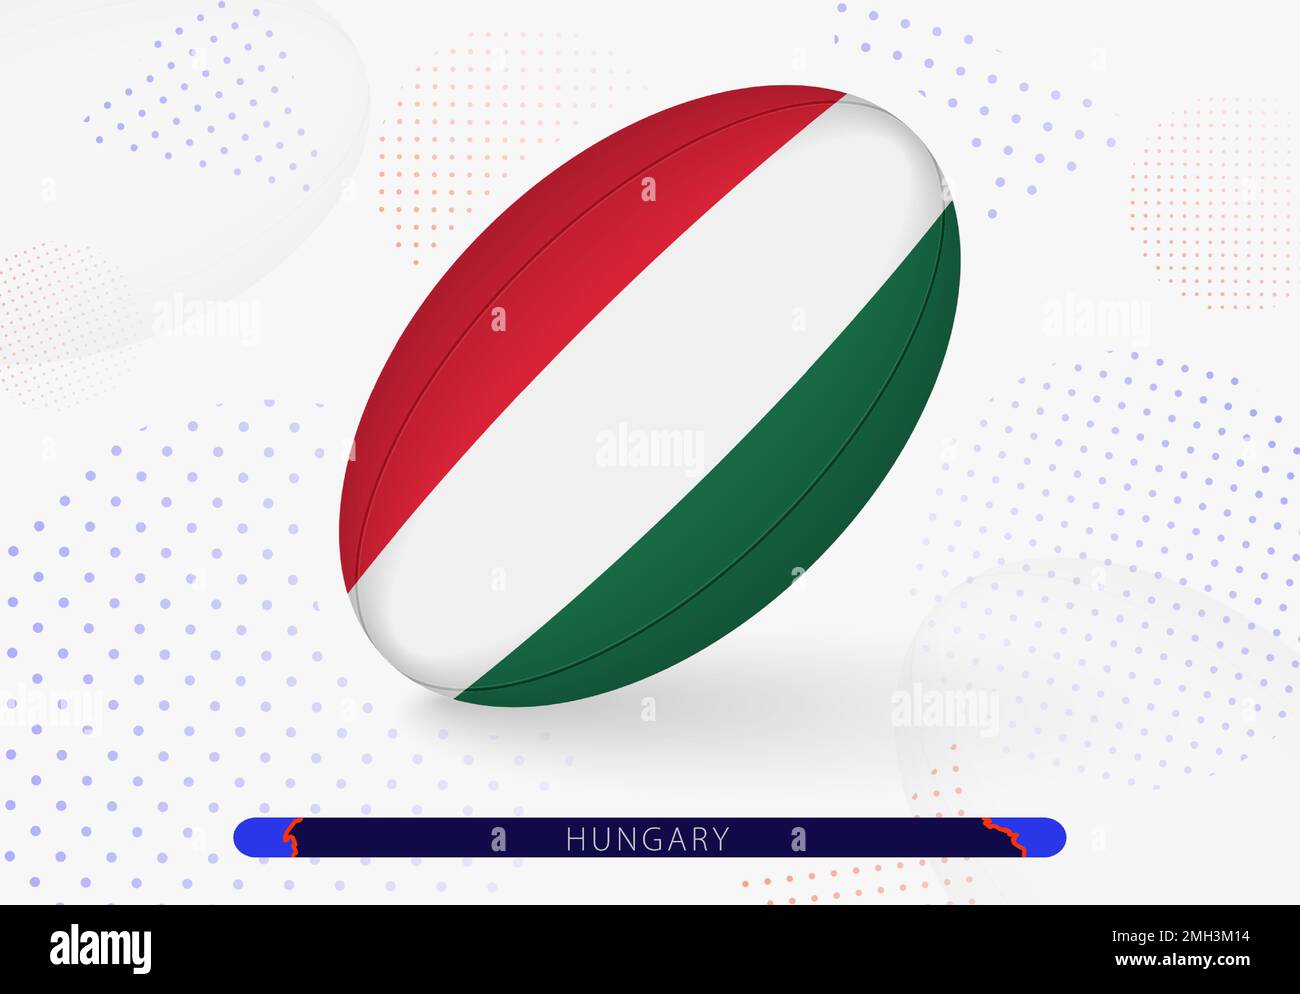 Rugby ball with the flag of Hungary on it. Equipment for rugby team of Hungary. Vector sport illustration. Stock Vector